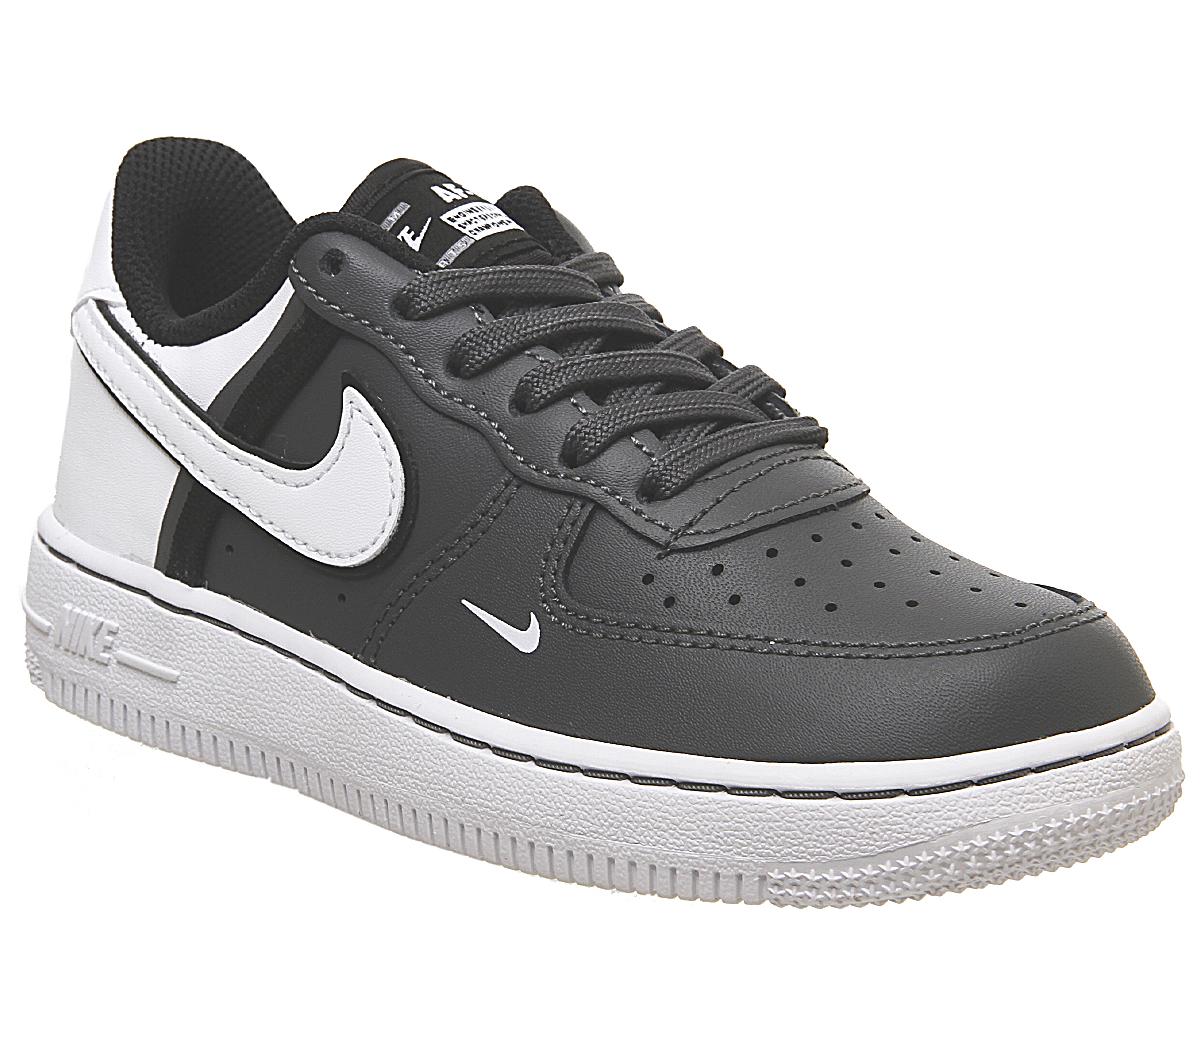 white & grey air force 1 lv8 trainers